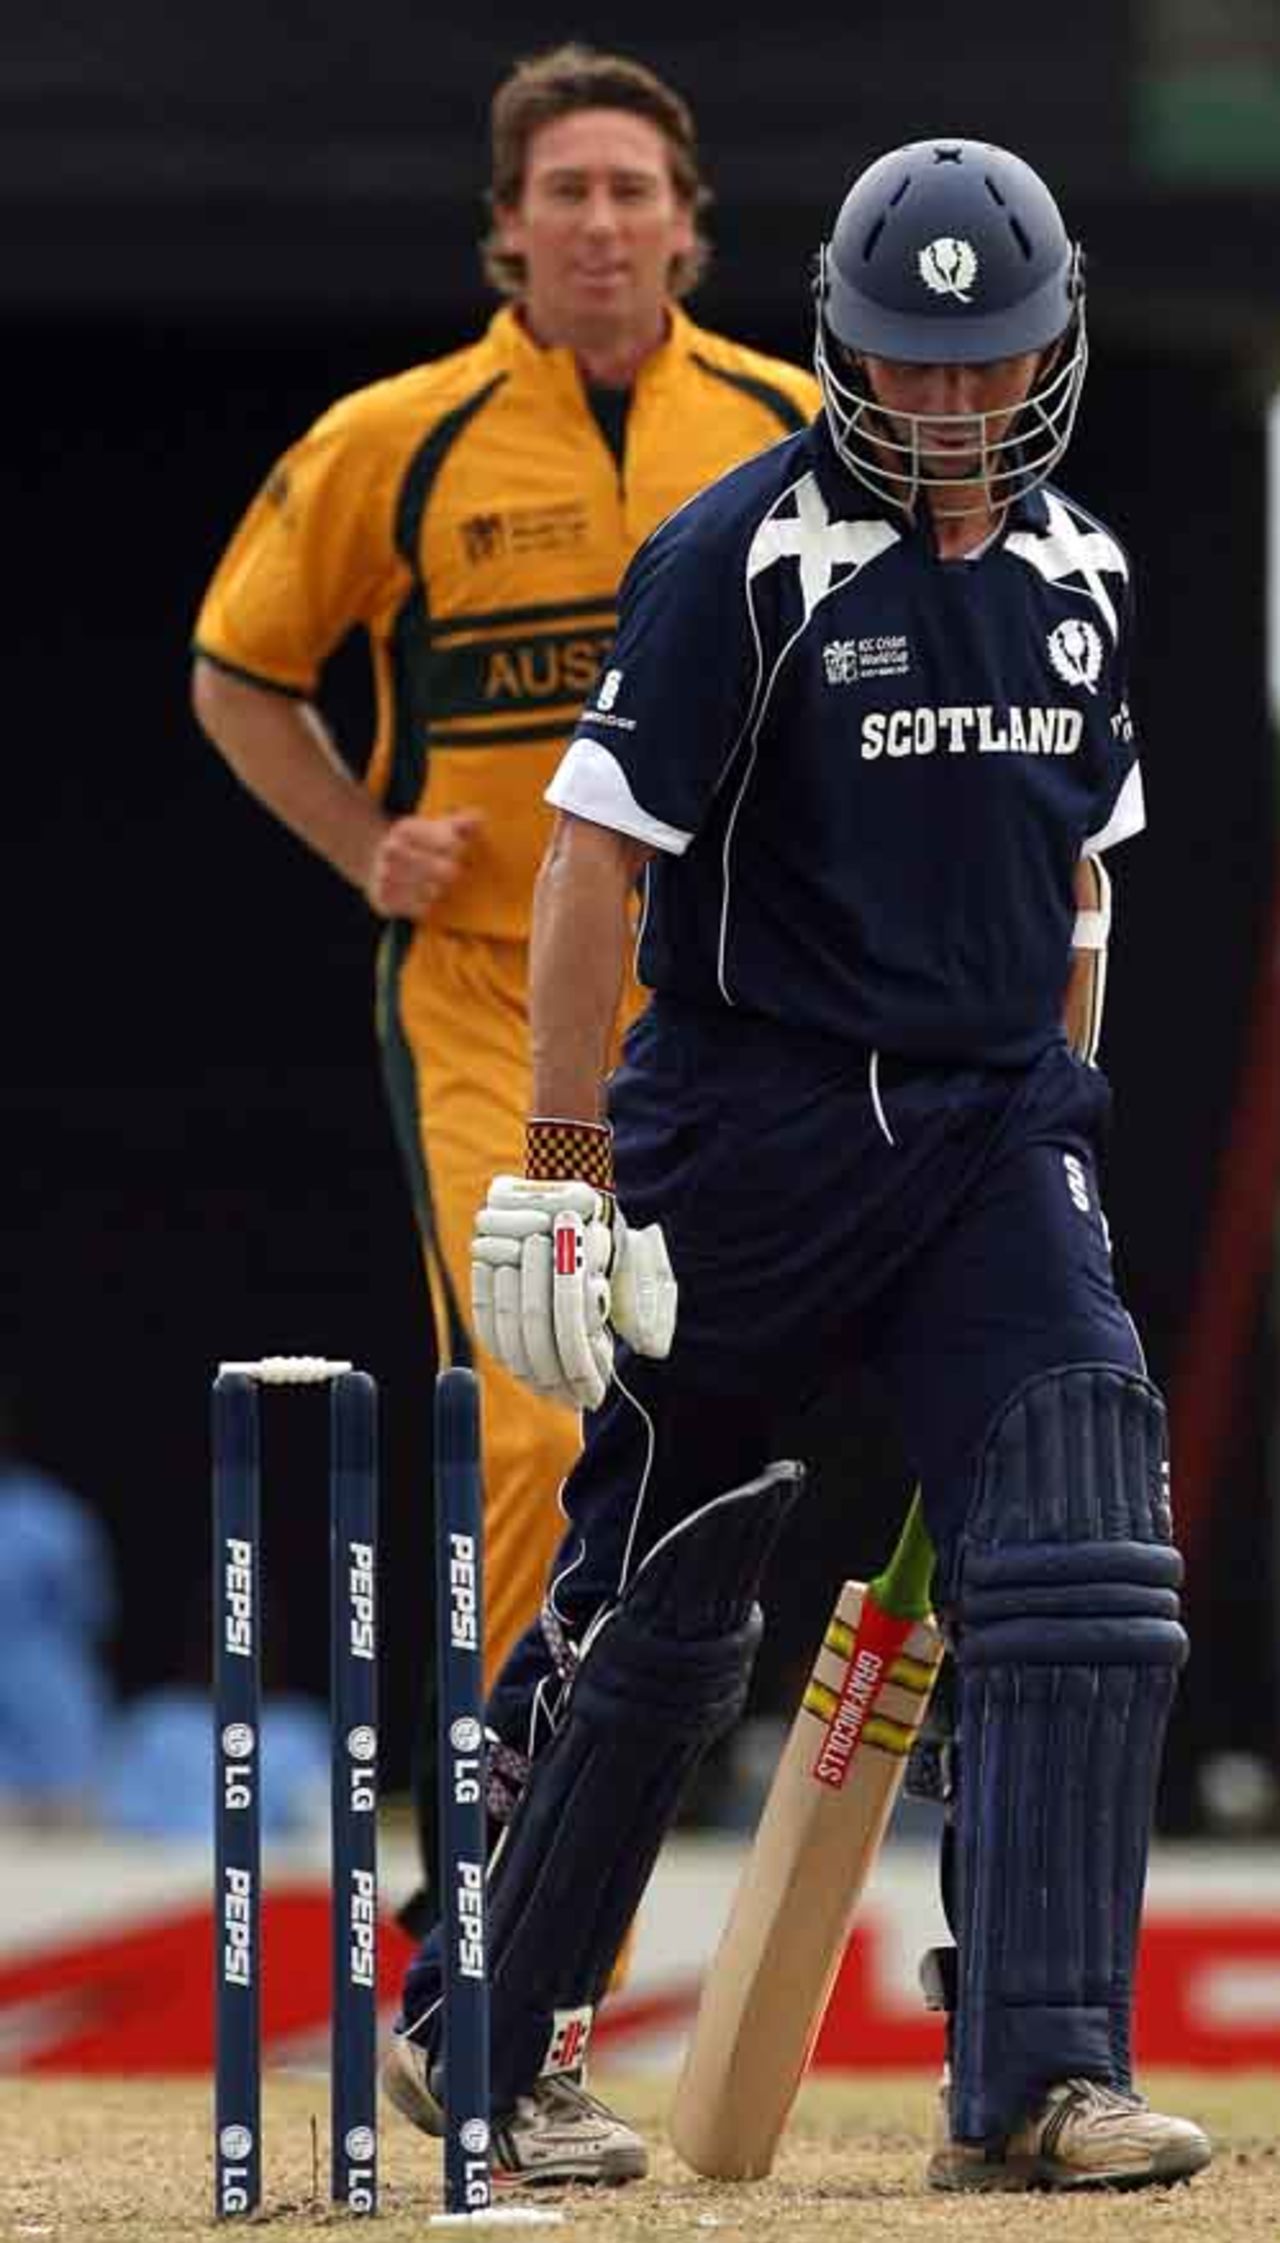 Fraser Watts had no answer to a sharp cutter from Glenn McGrath, Australia v Scotland, Group A, Basseterre, 2007 World Cup, March 14, 2007